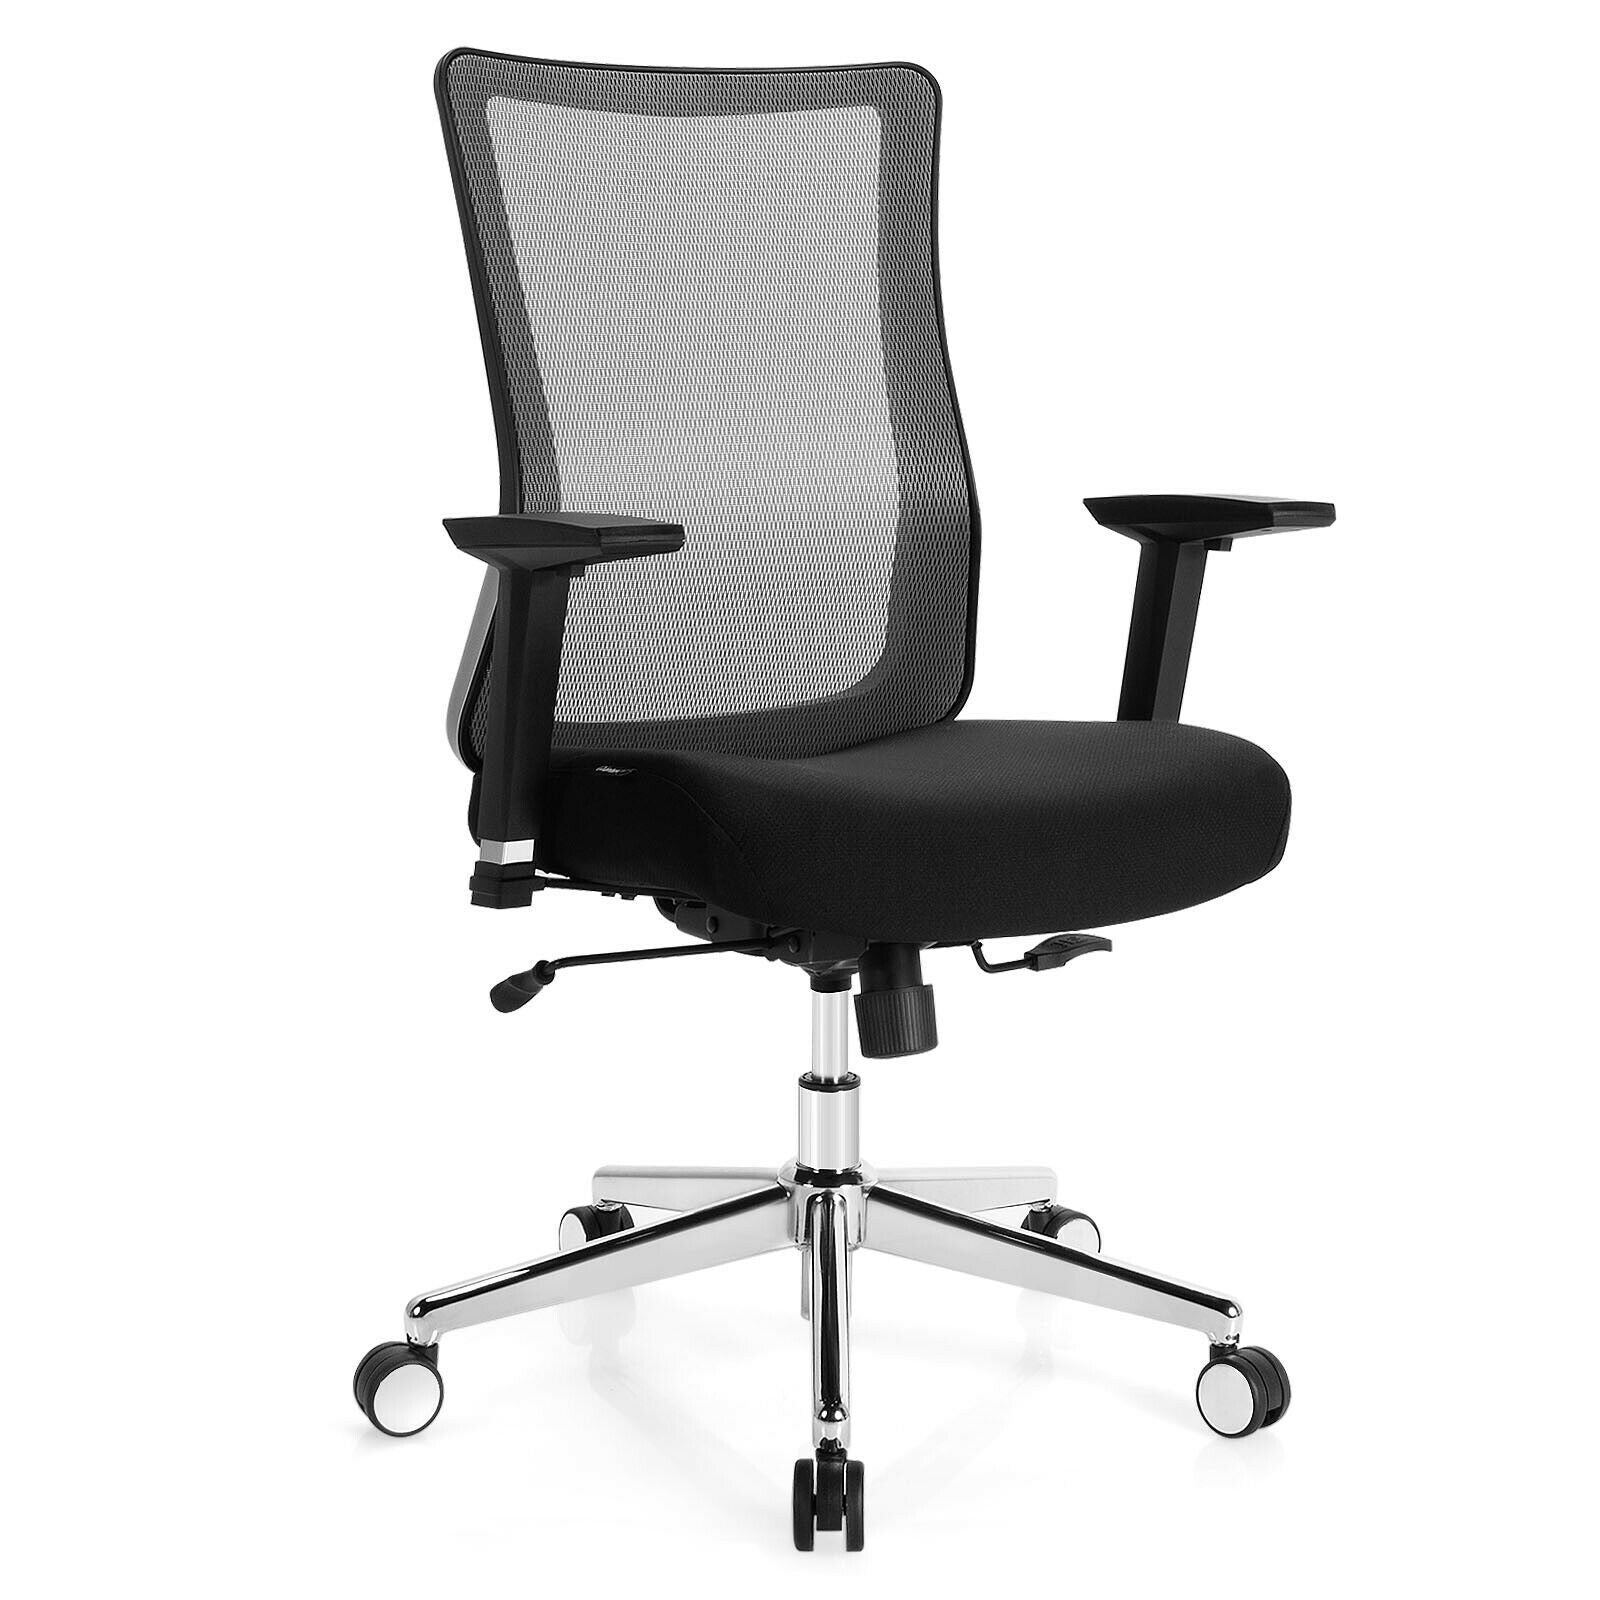 Giantex Ergonomic Office Chair, Mesh Chair with 4 Inch Soft Thick Sliding Seat